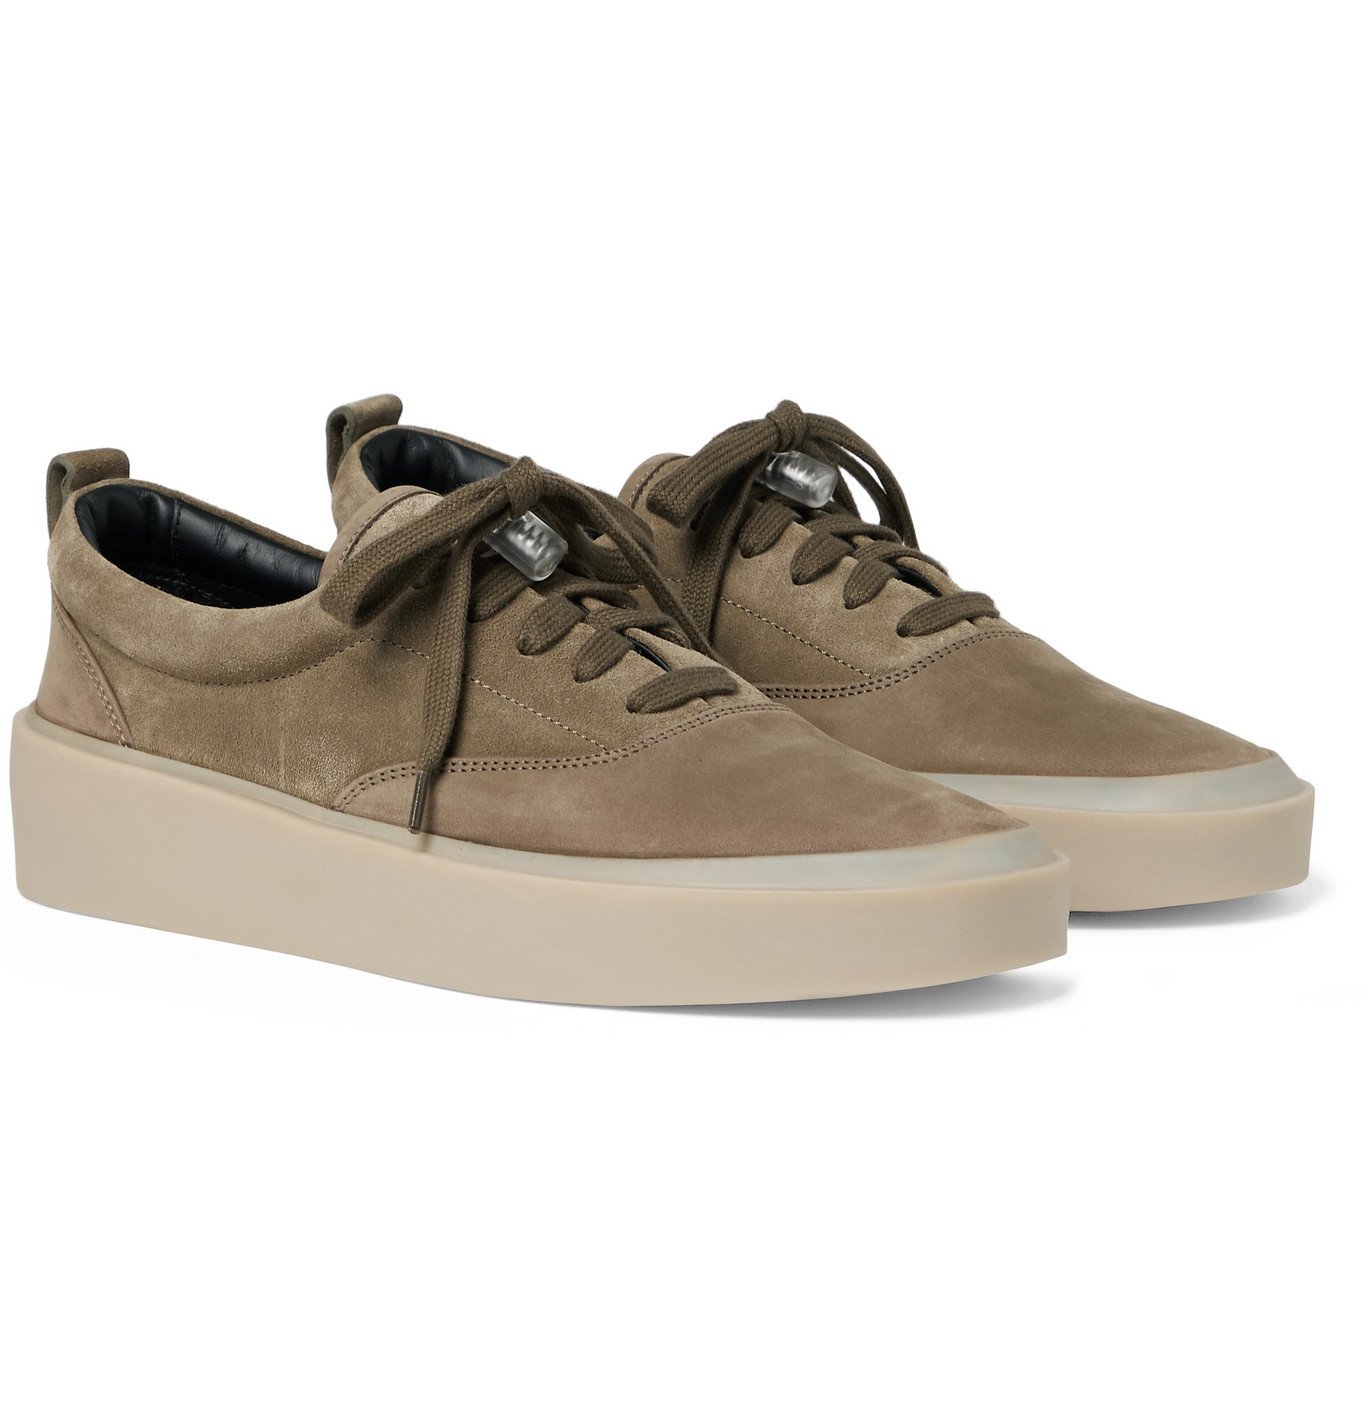 Fear of God - 101 Suede and Nubuck Sneakers - Green Fear Of God